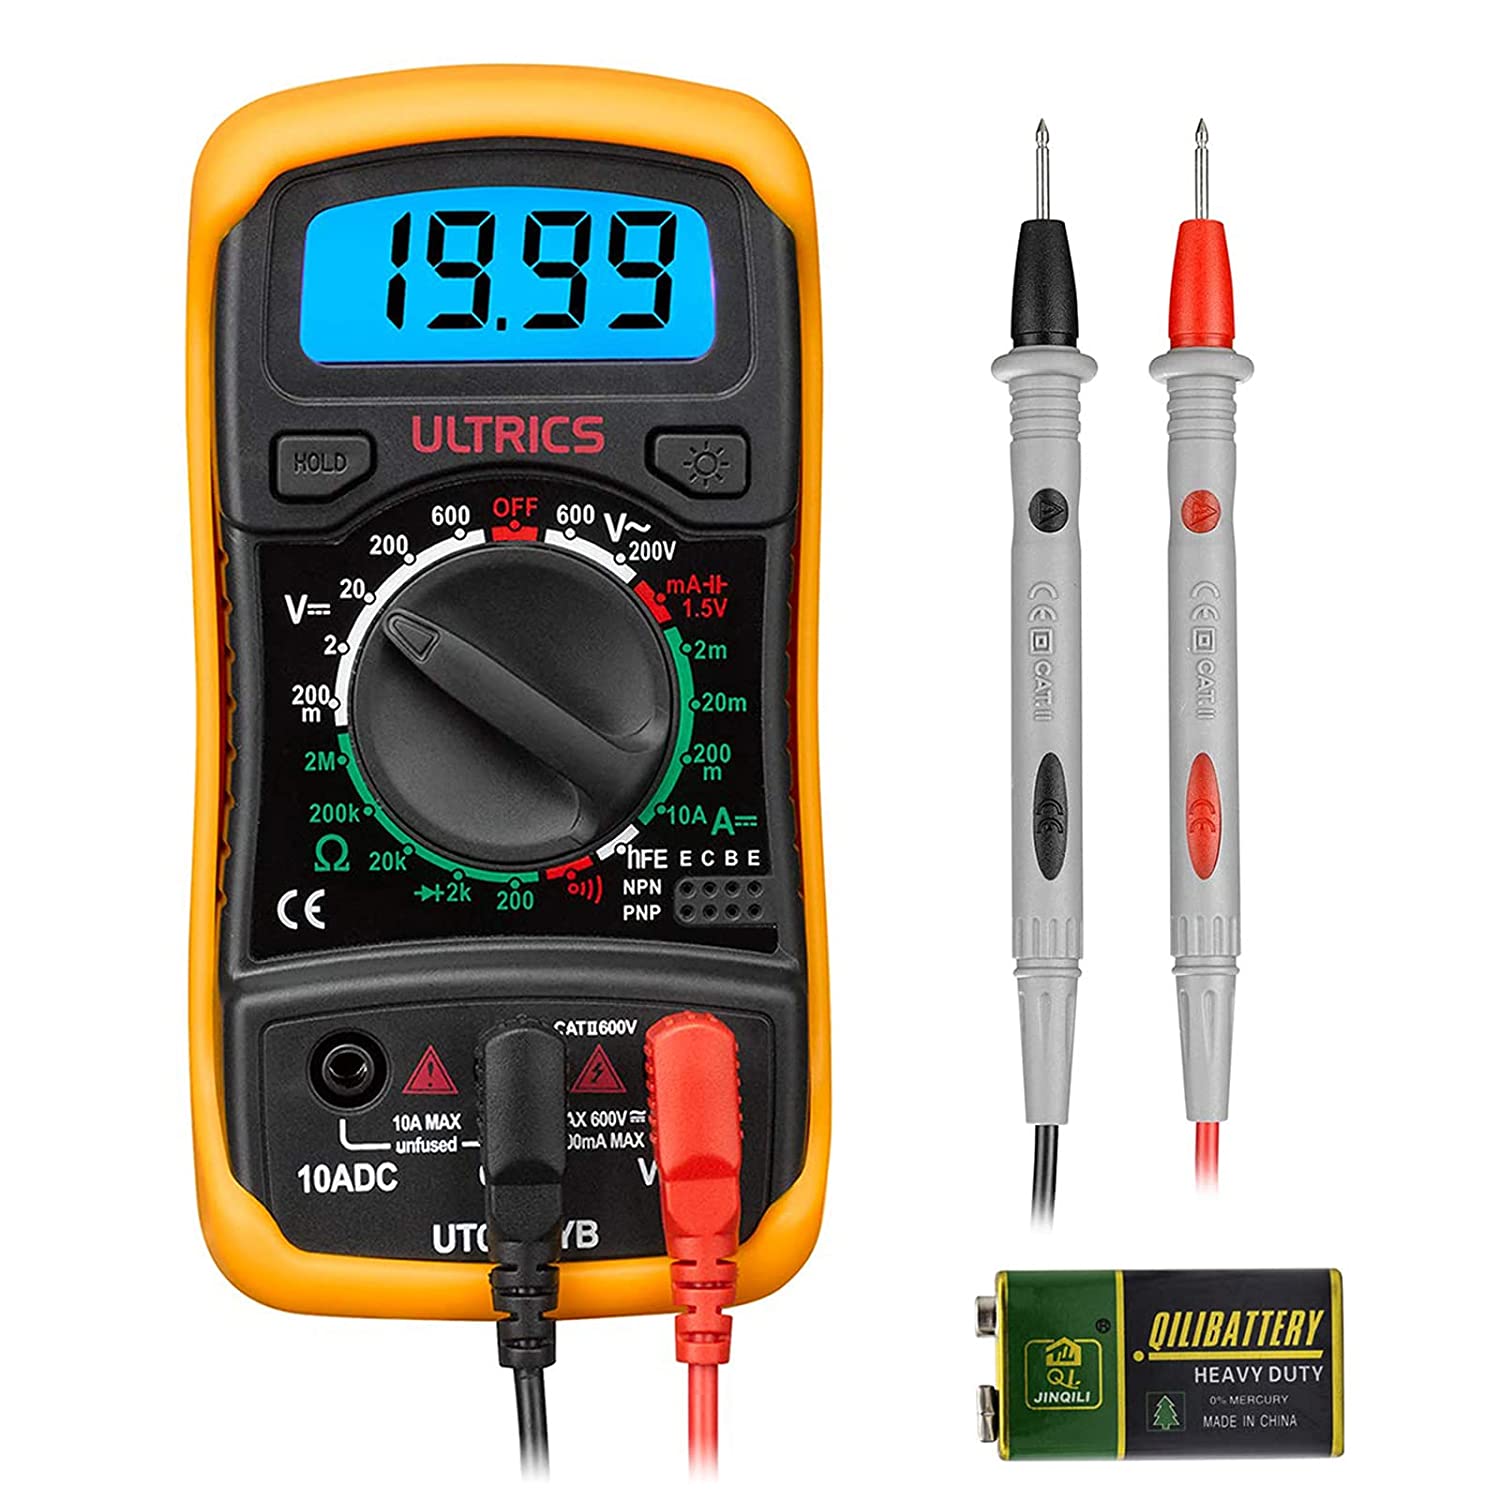 multimeter for electronics multimeter how to use multimeter usage multimeter use multimeters usage of multimeter use of multimeter uses of digital multimeter using a multimeter